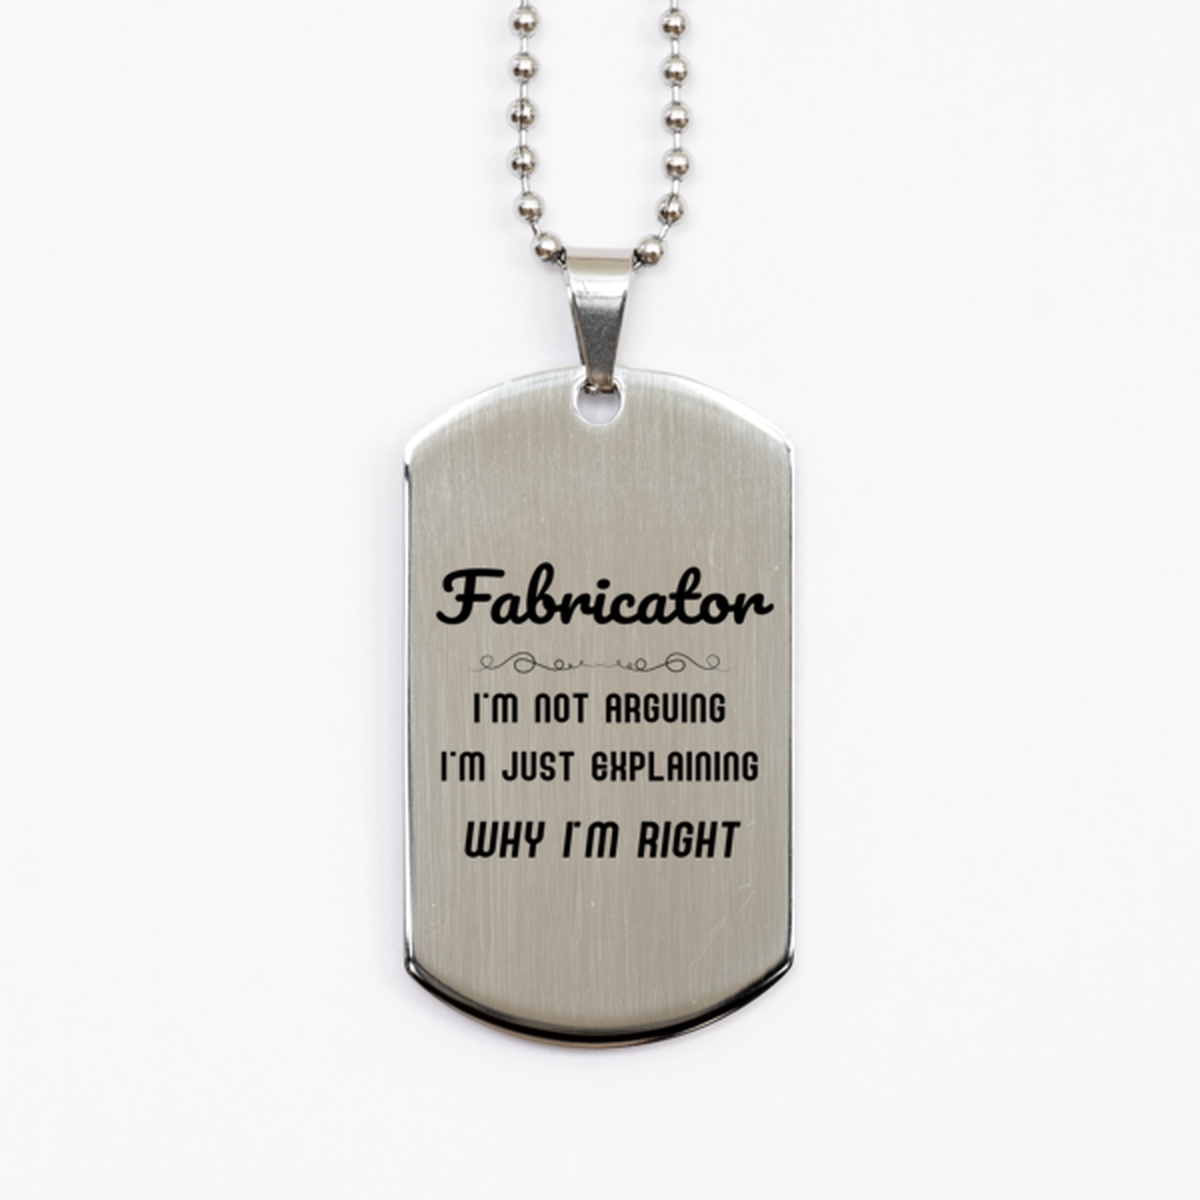 Fabricator I'm not Arguing. I'm Just Explaining Why I'm RIGHT Silver Dog Tag, Funny Saying Quote Fabricator Gifts For Fabricator Graduation Birthday Christmas Gifts for Men Women Coworker